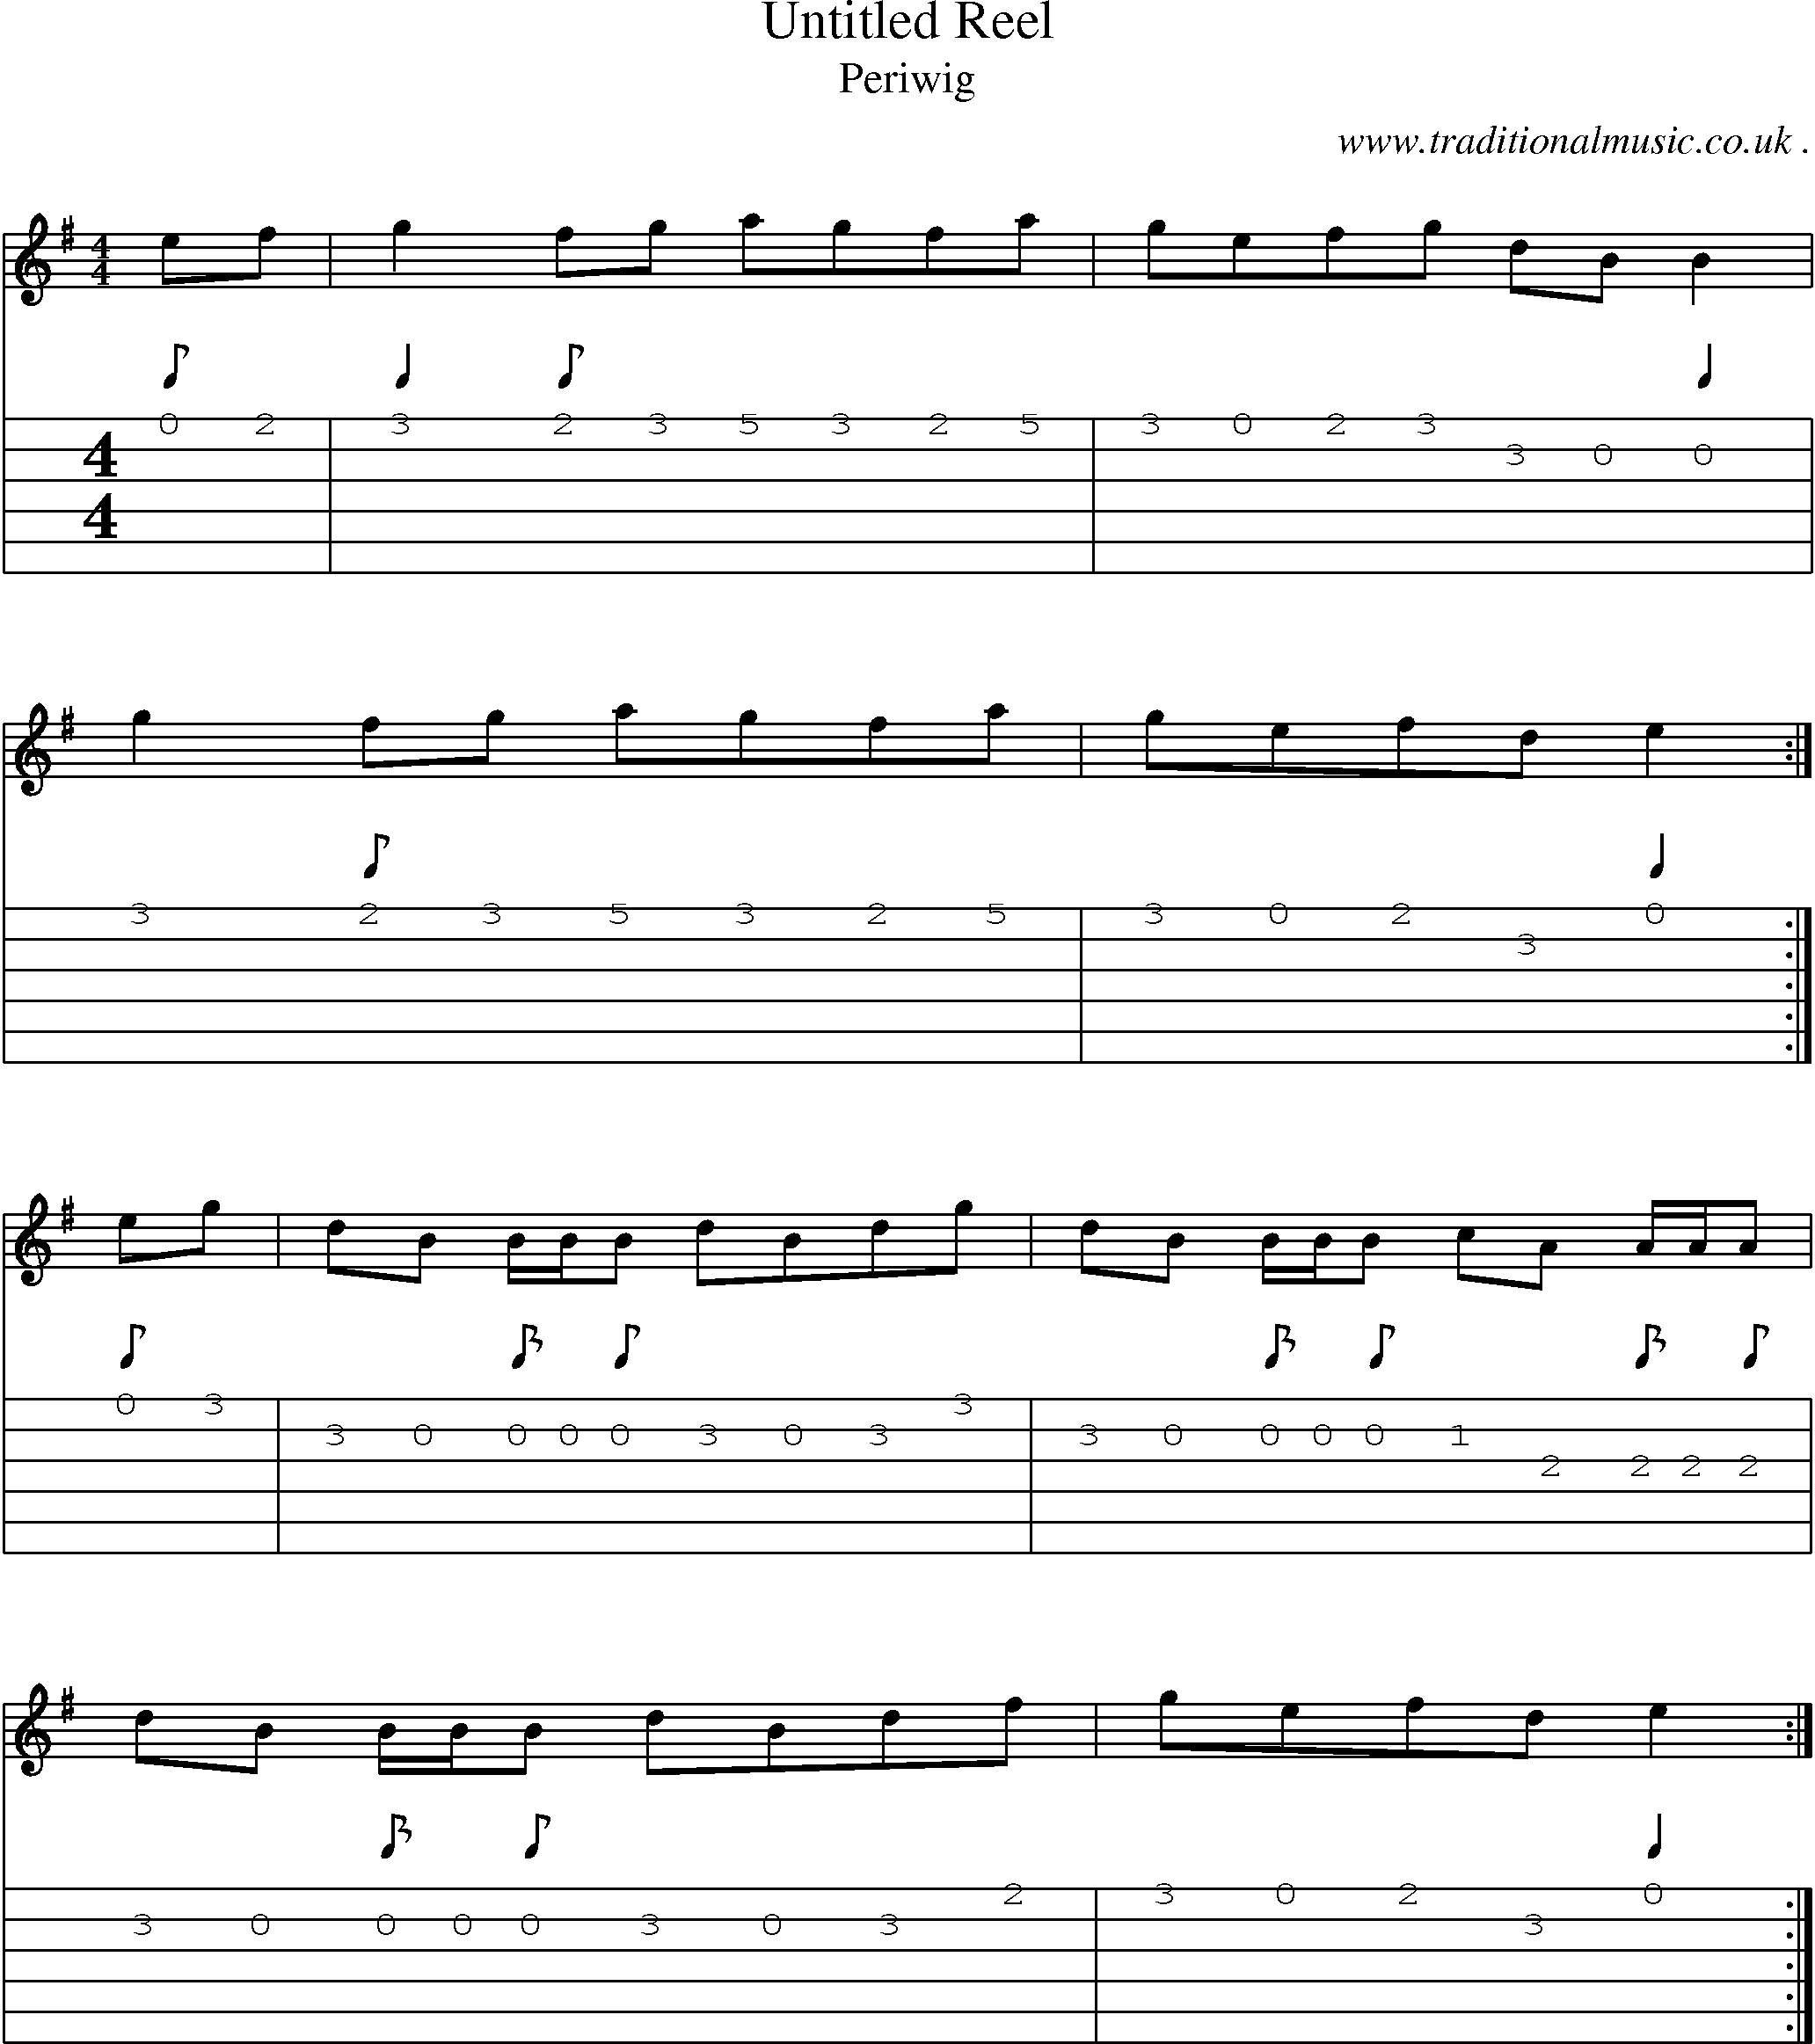 Sheet-music  score, Chords and Guitar Tabs for Untitled Reel